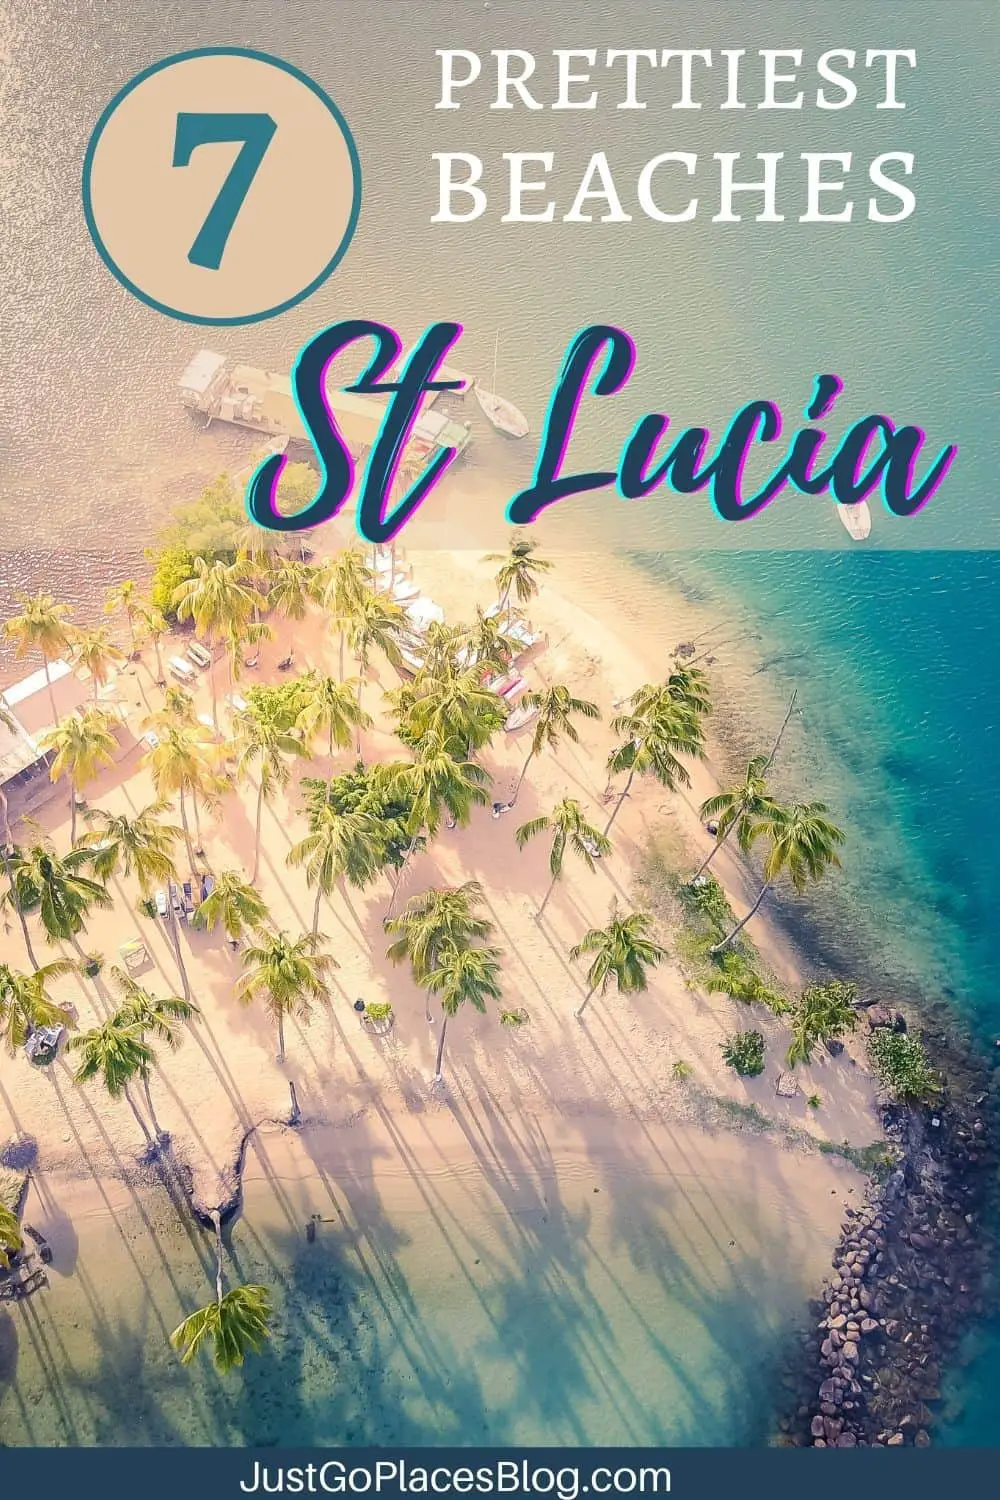 Pinterest Image of an aerial view of Marigot Beach St Lucia with the text: "7 prettiest beaches St Lucia"